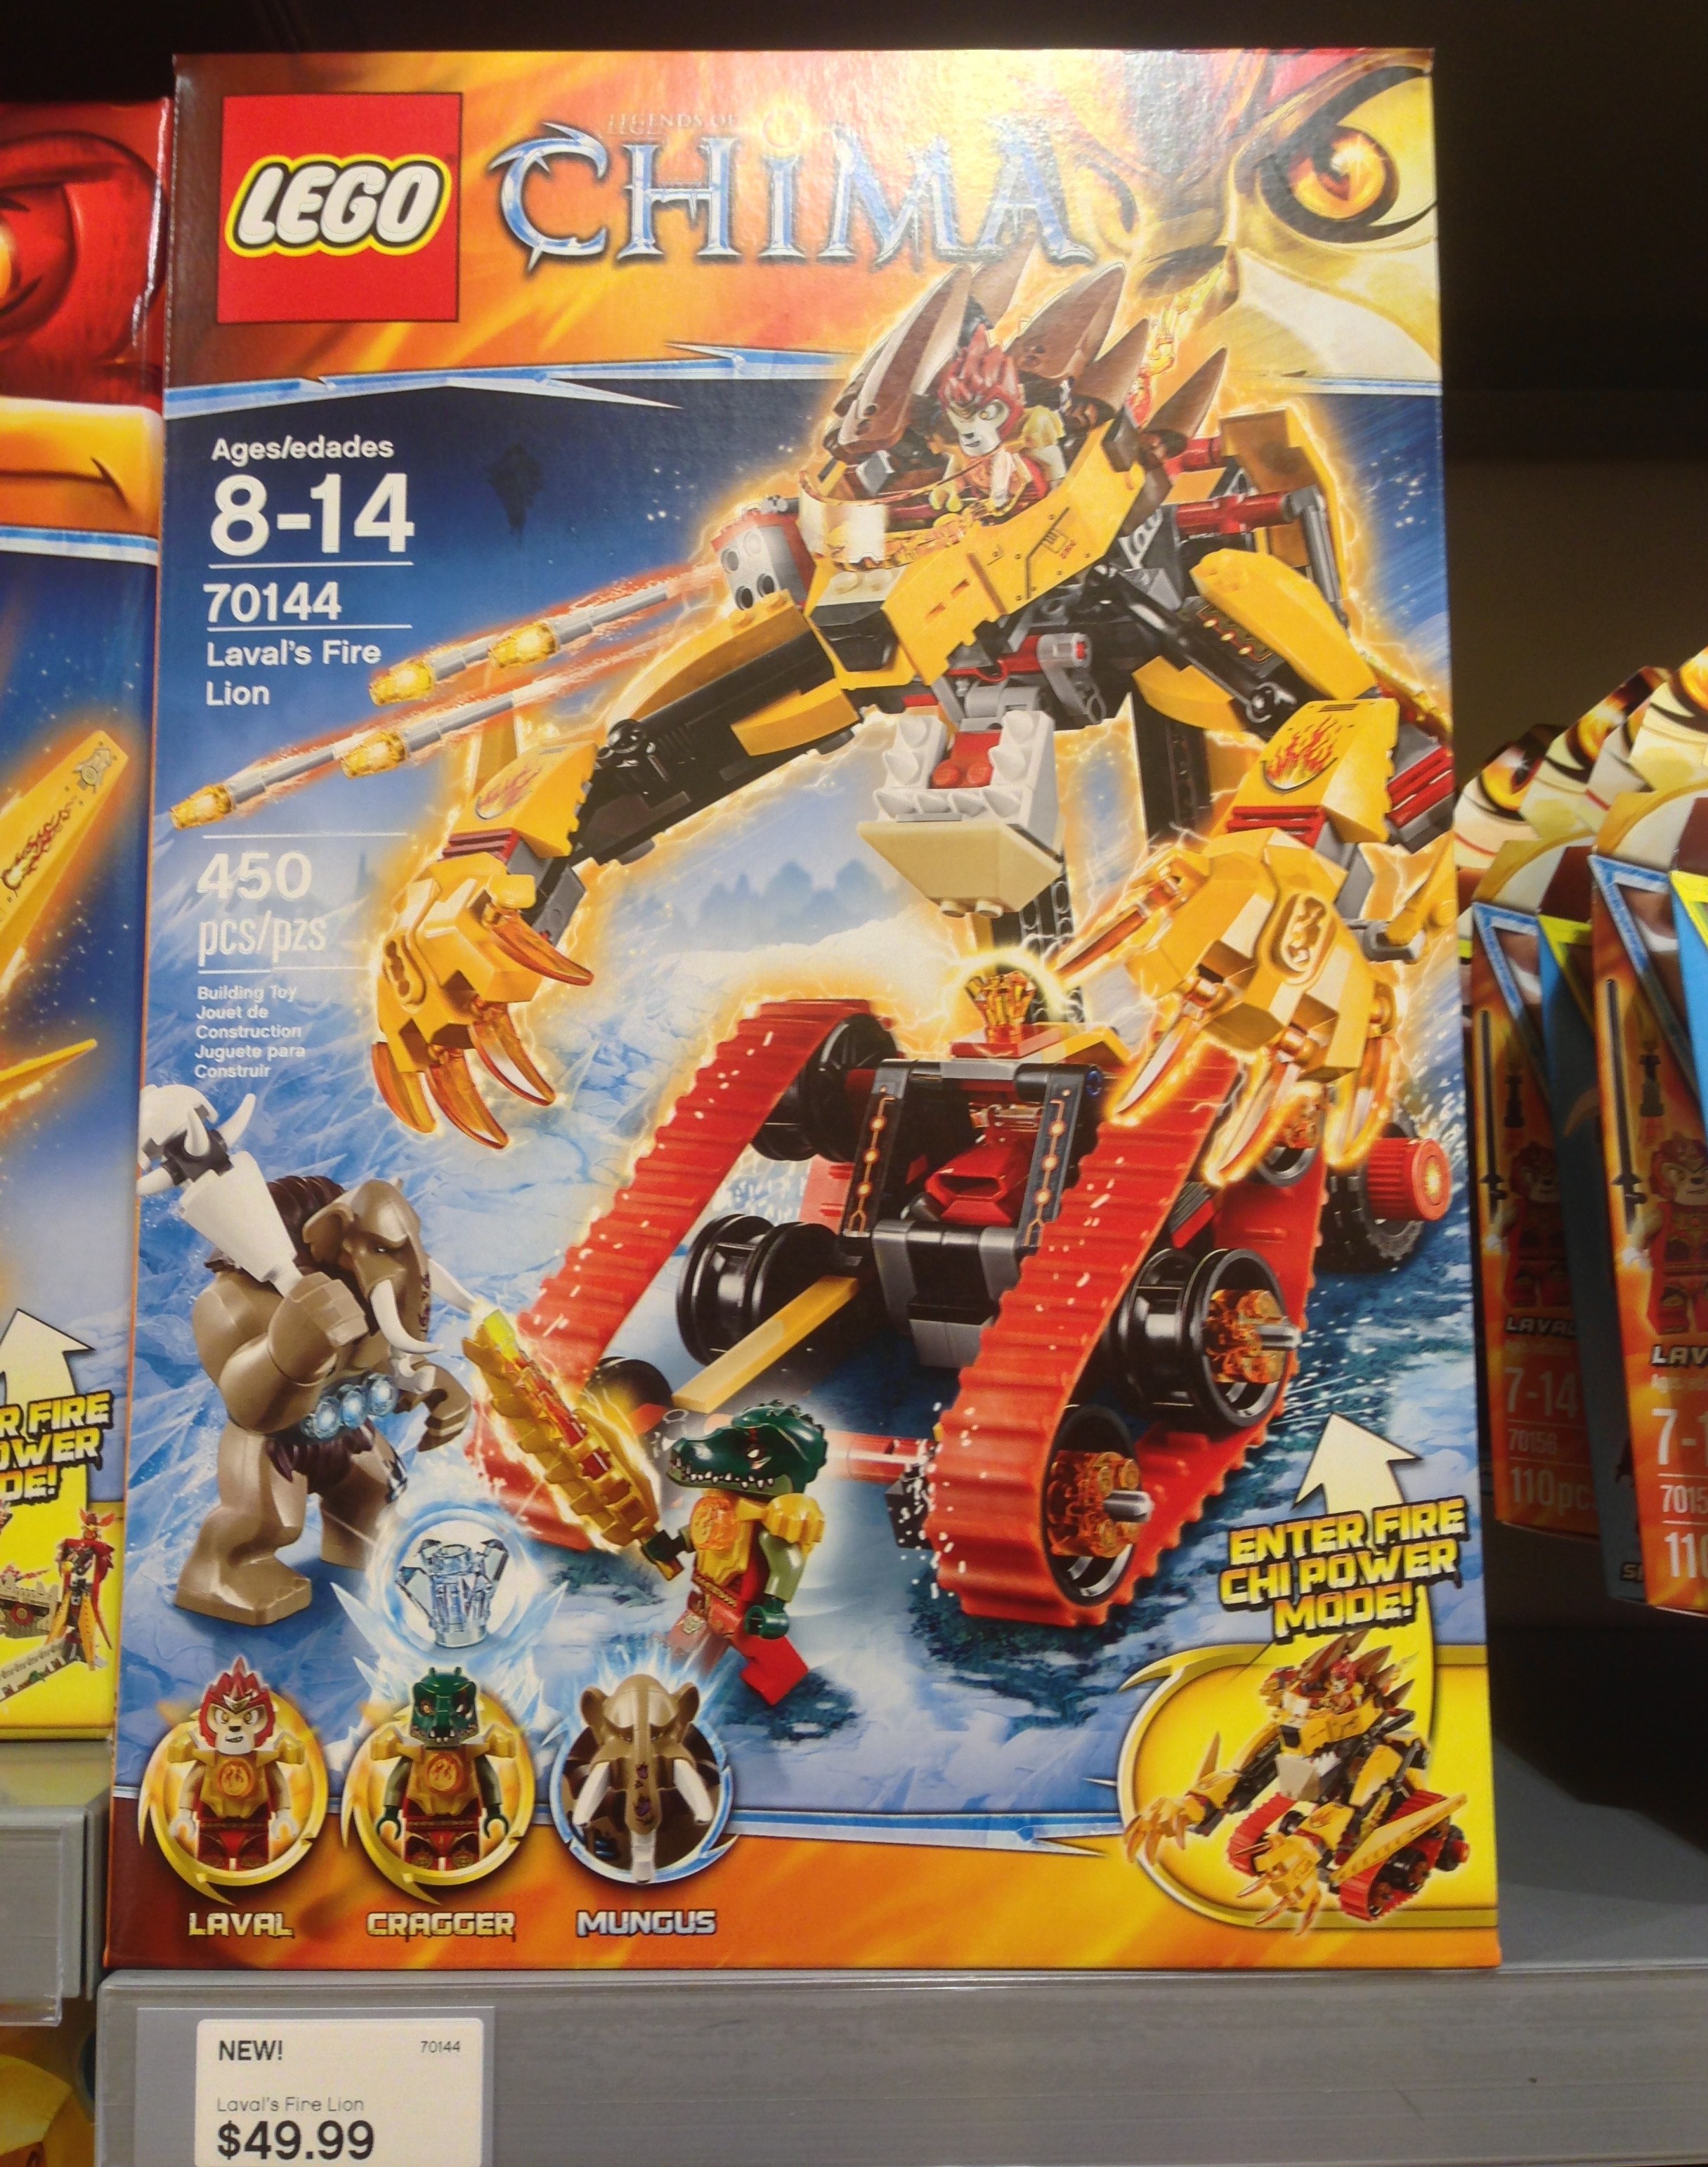 Summer 2014 LEGO Chima Sets Released in the United States! - Bricks and Bloks